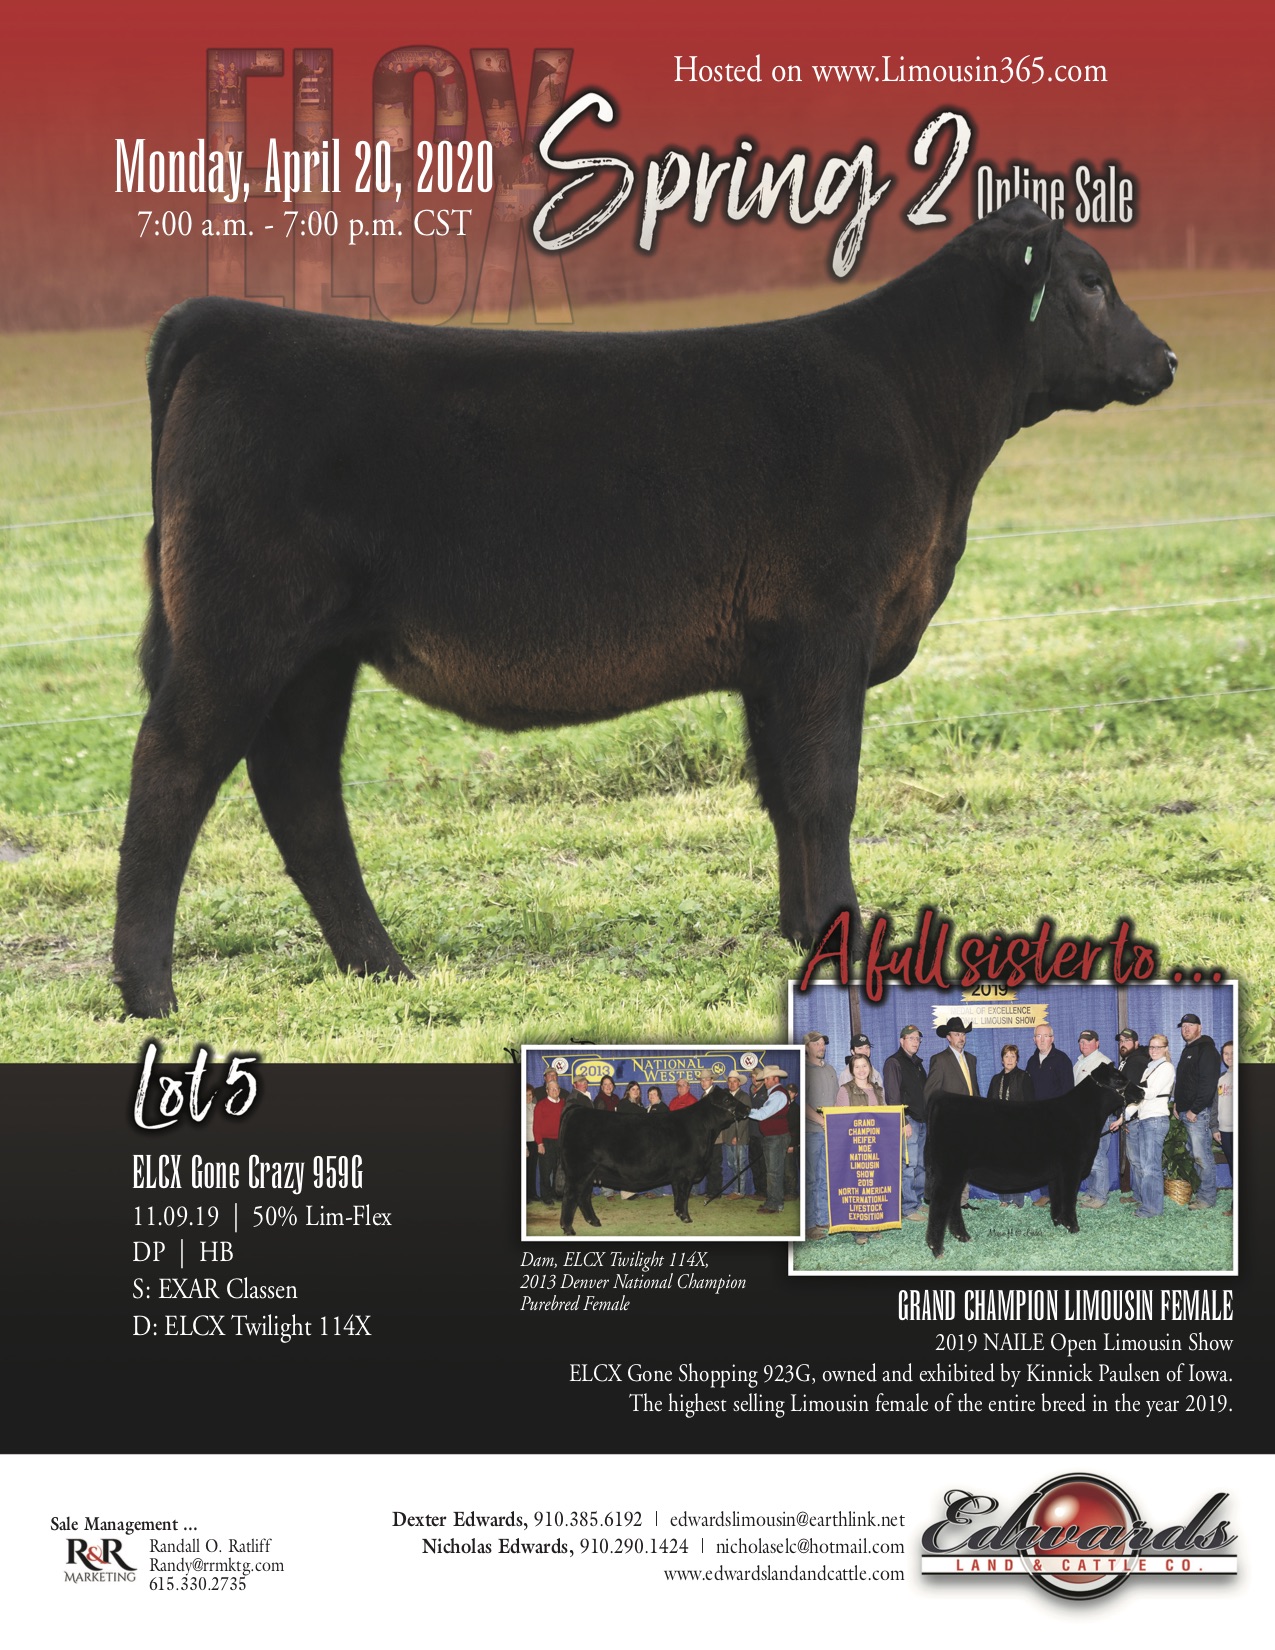 2020 ELCX Spring II Online Sale – Full Sibling to 2019 NAILE Grand Champion